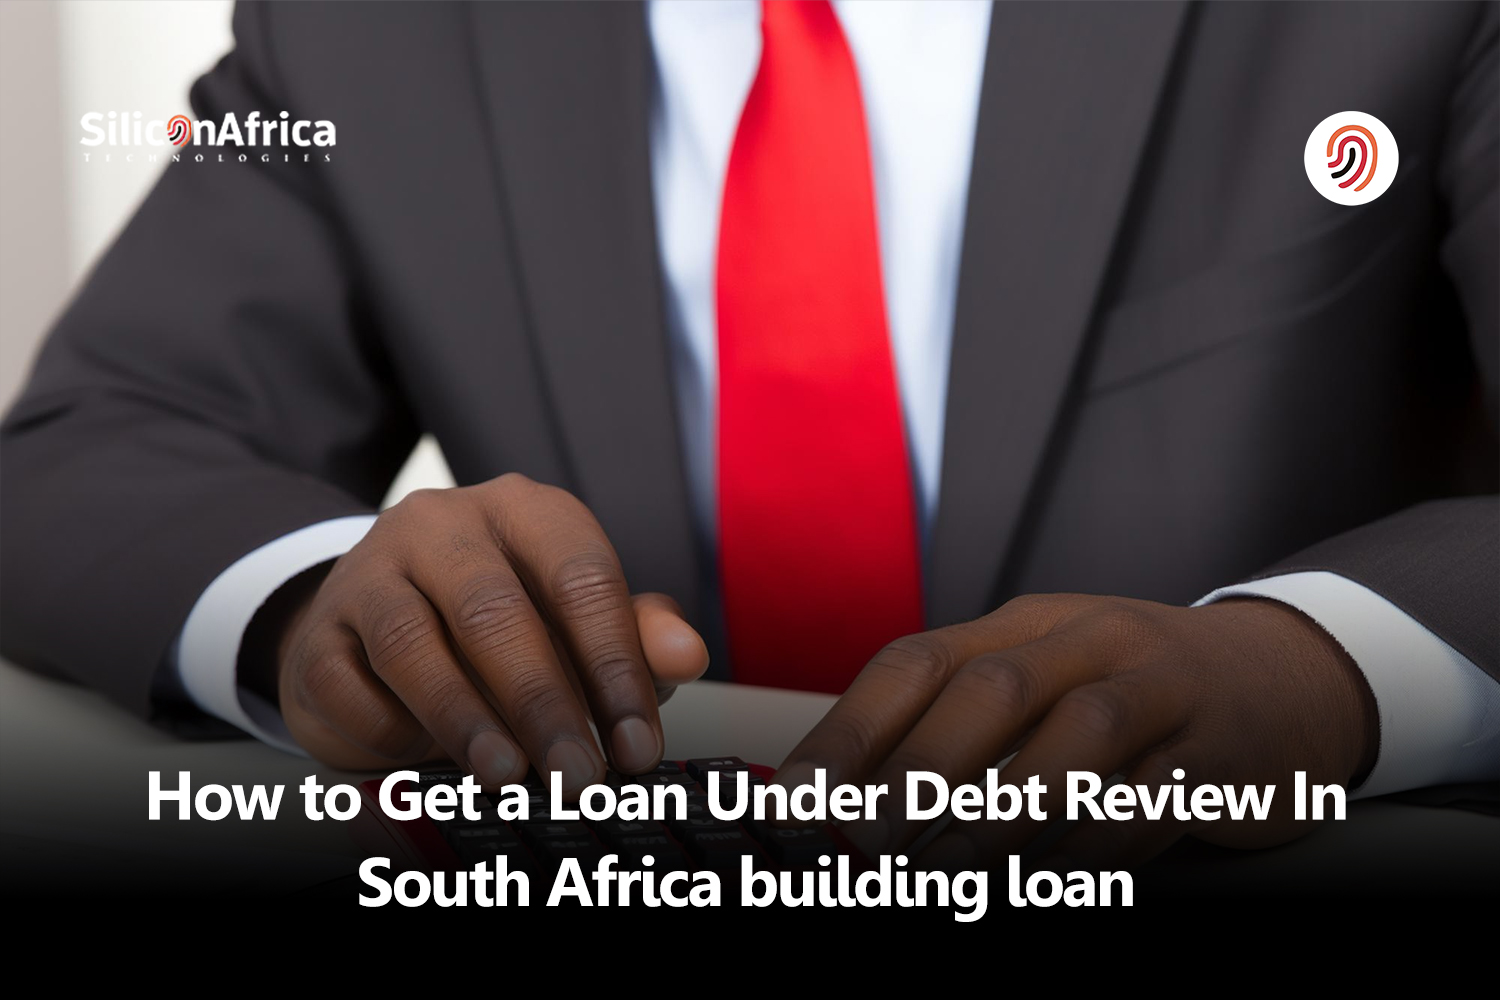 under debt review and need a loan